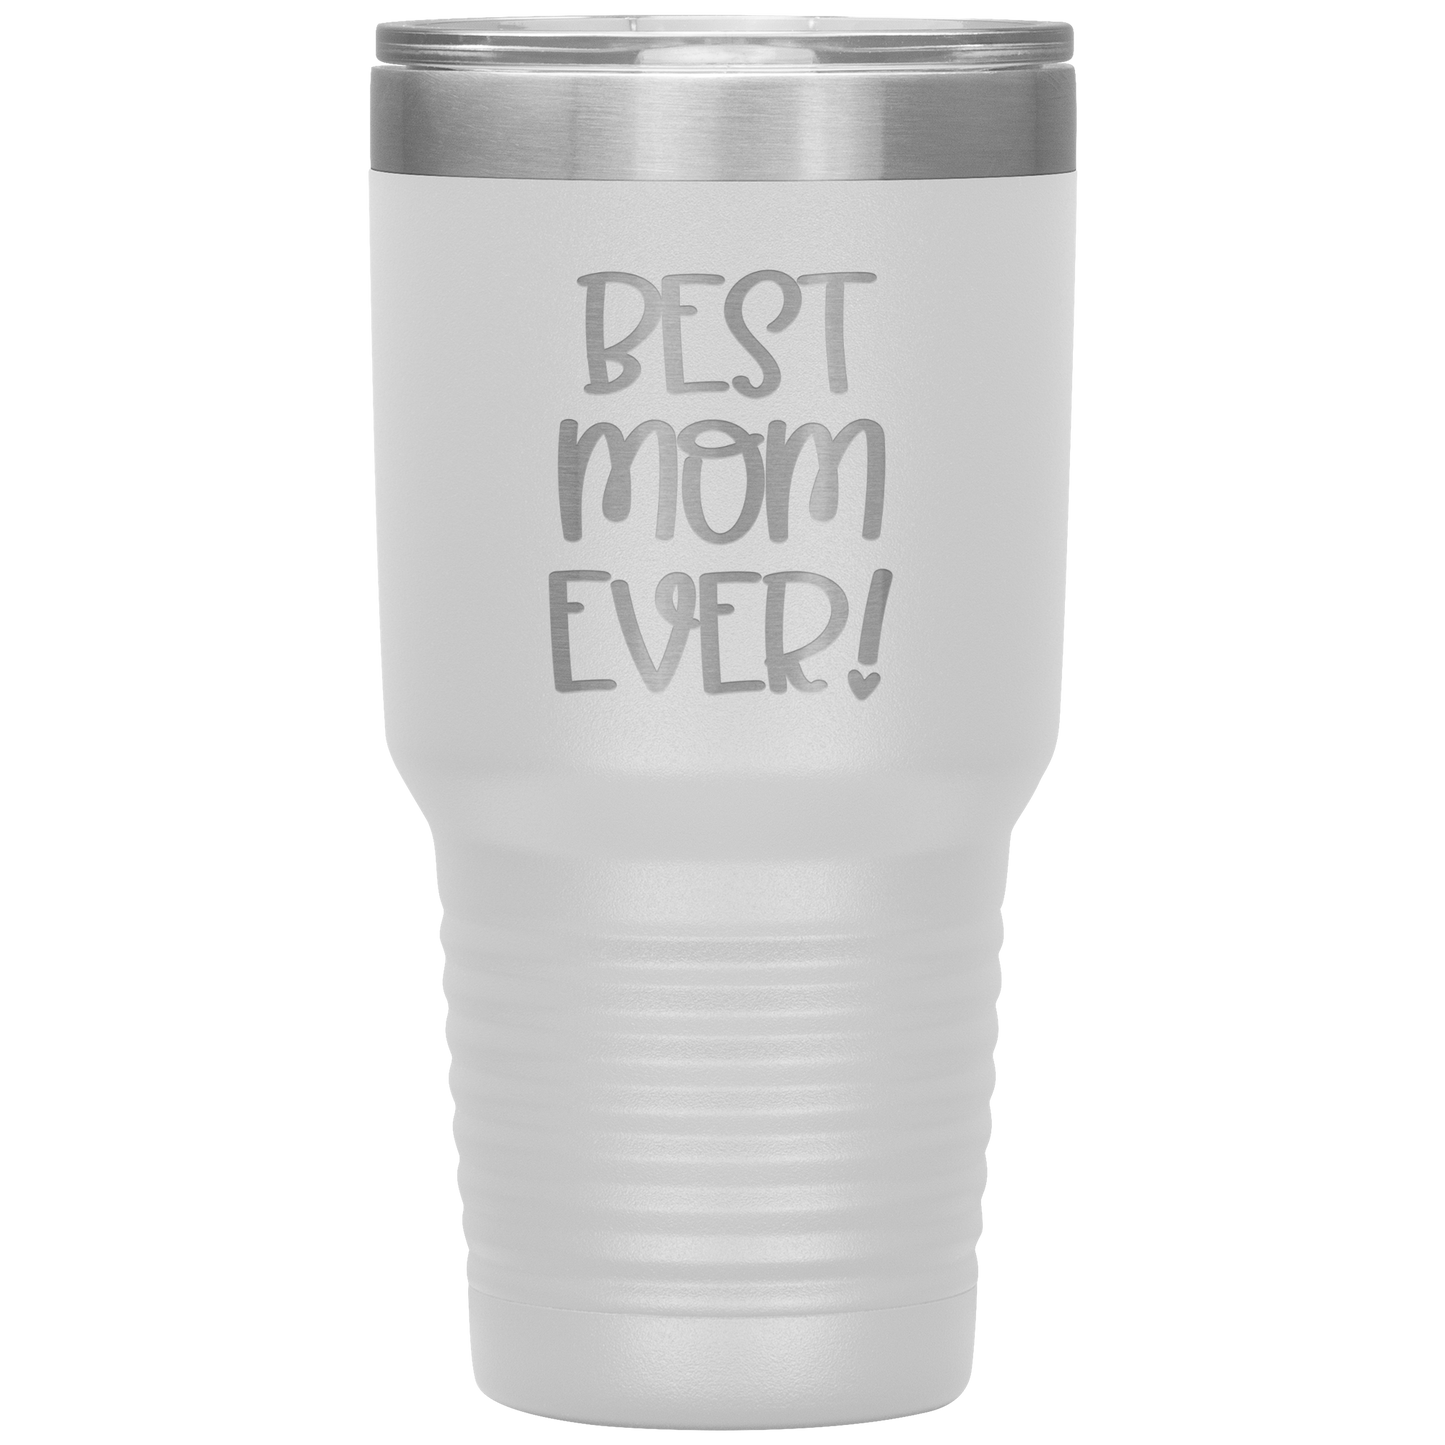 "Best Mom Ever!" 30 oz. Insulated Stainless Steel Insulated Travel Coffee Cup with Lid